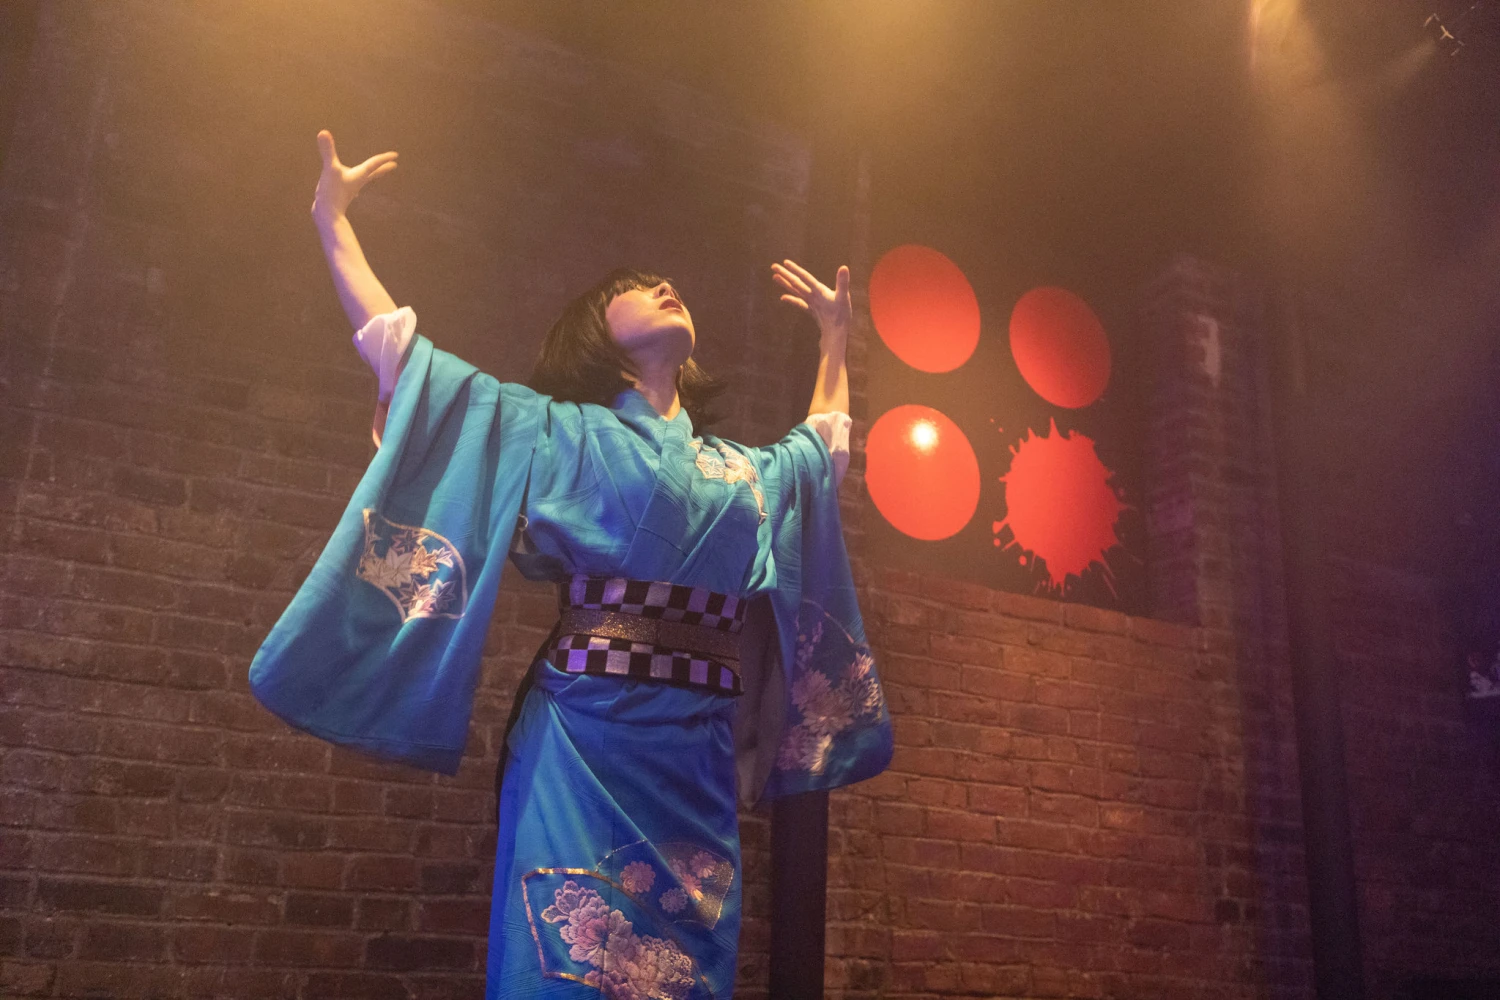 BATSU!  The Live Japanese Gameshow Experience: What to expect - 1